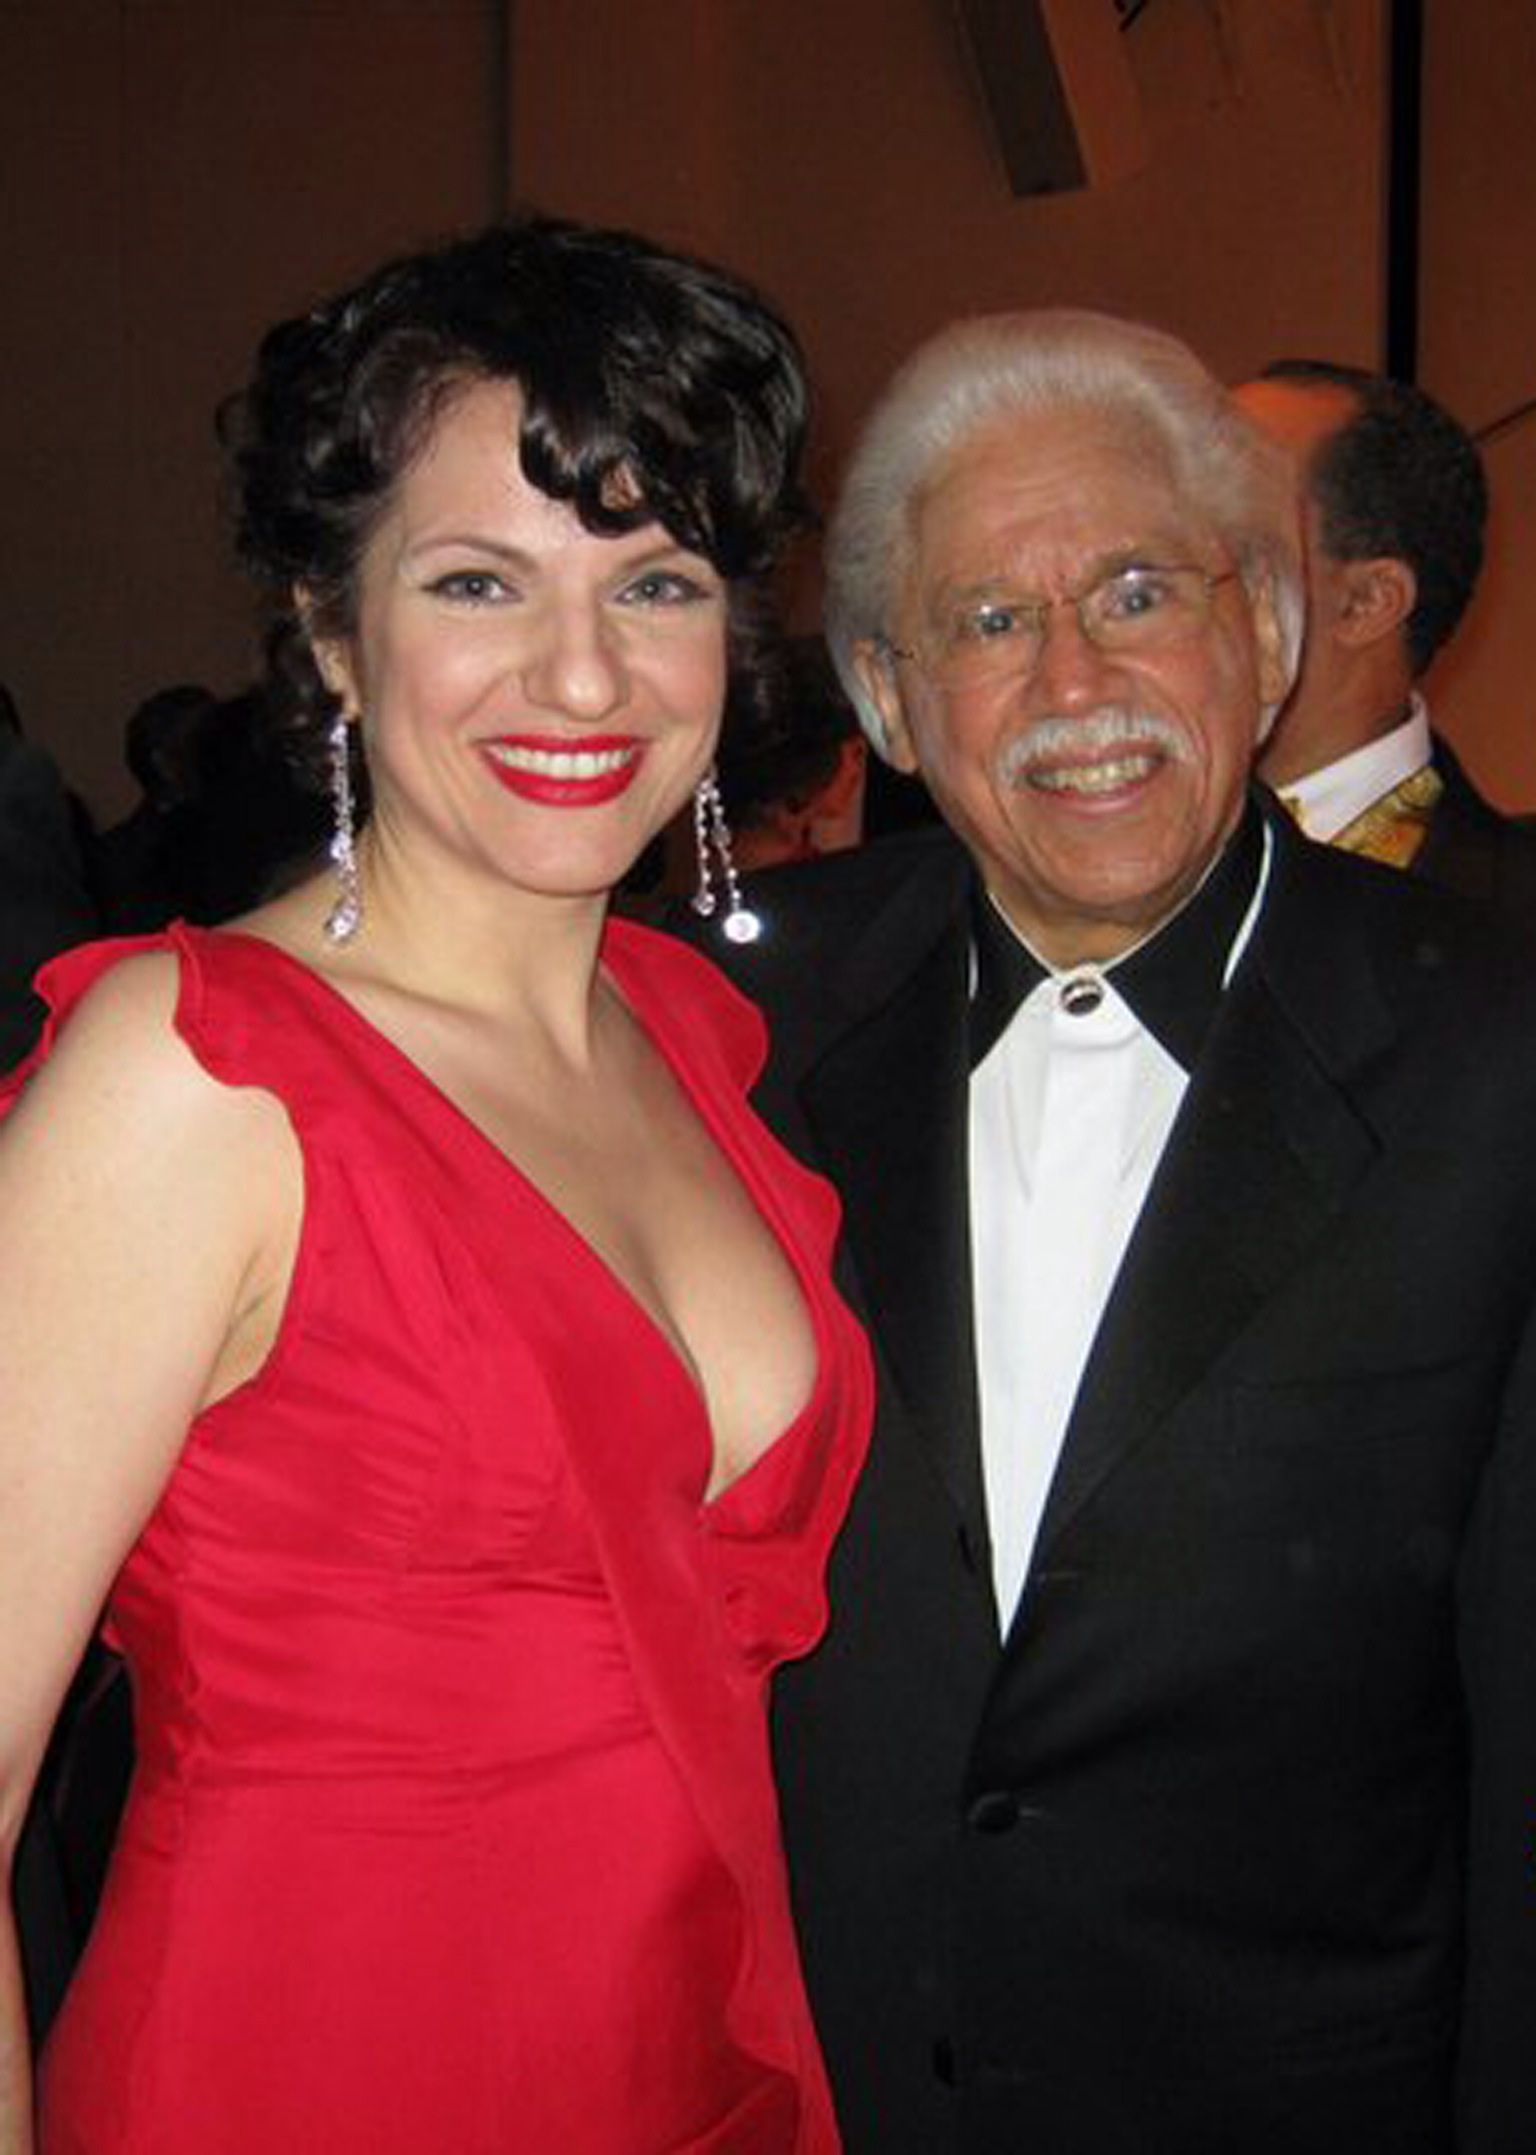 Lina Sarrello with Johnny Pacheco at the Latin ACE Awards in 2010